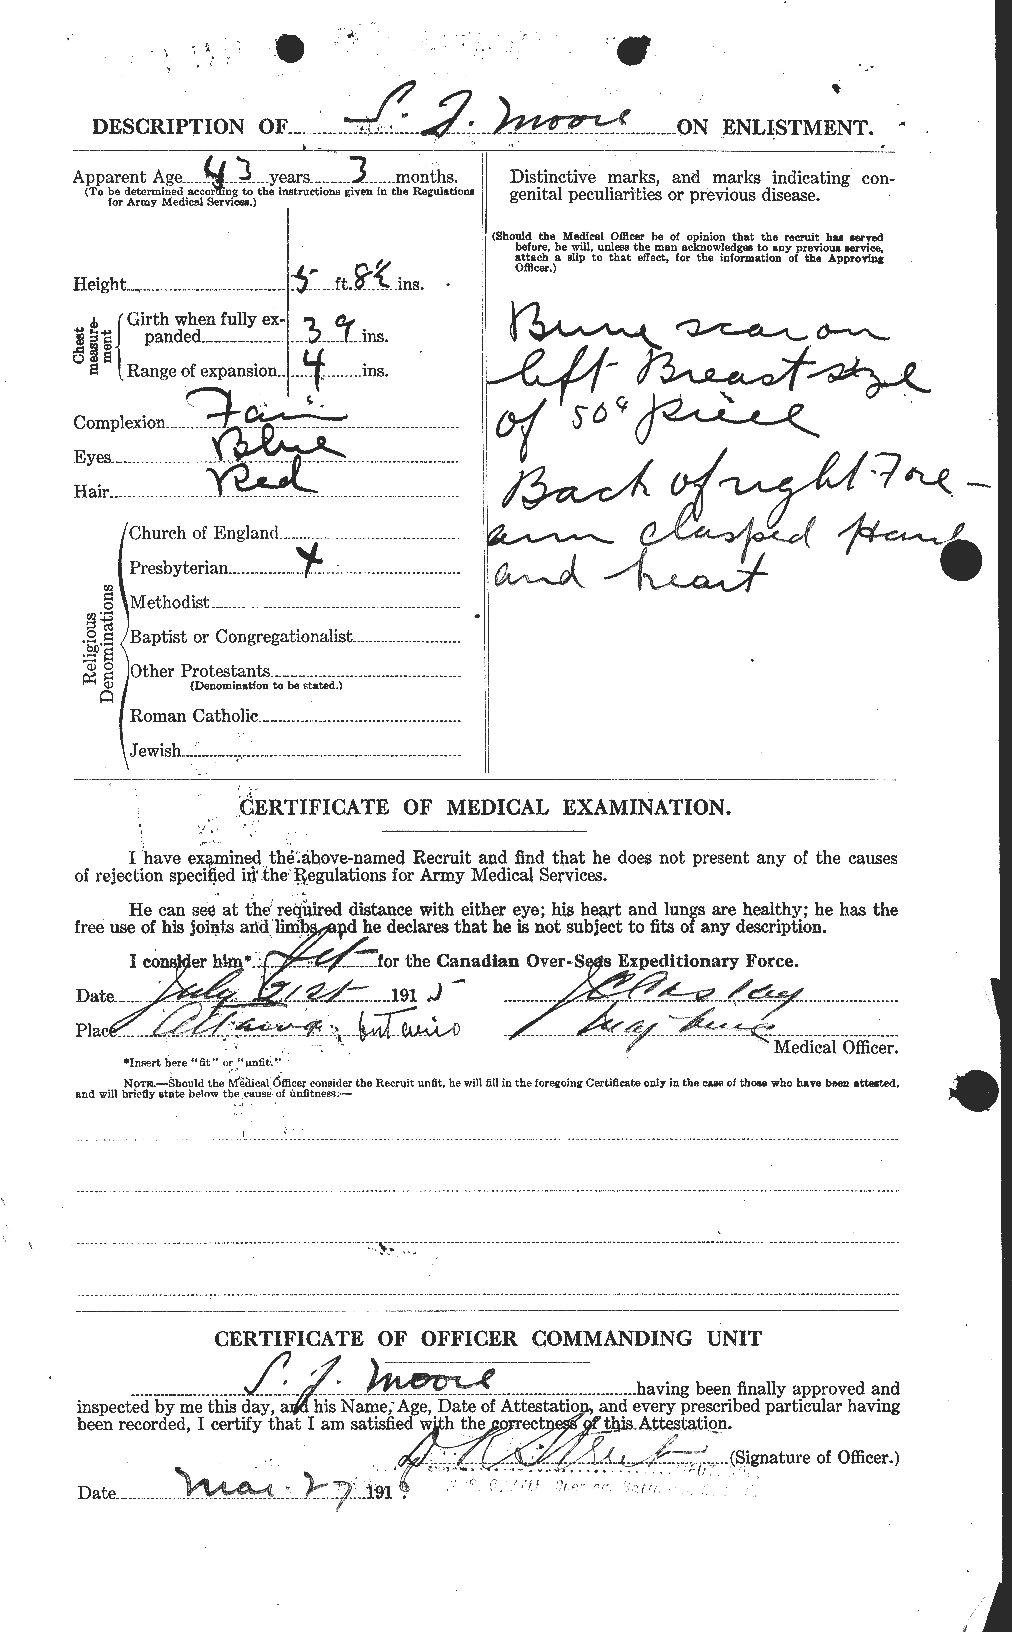 Personnel Records of the First World War - CEF 505569b